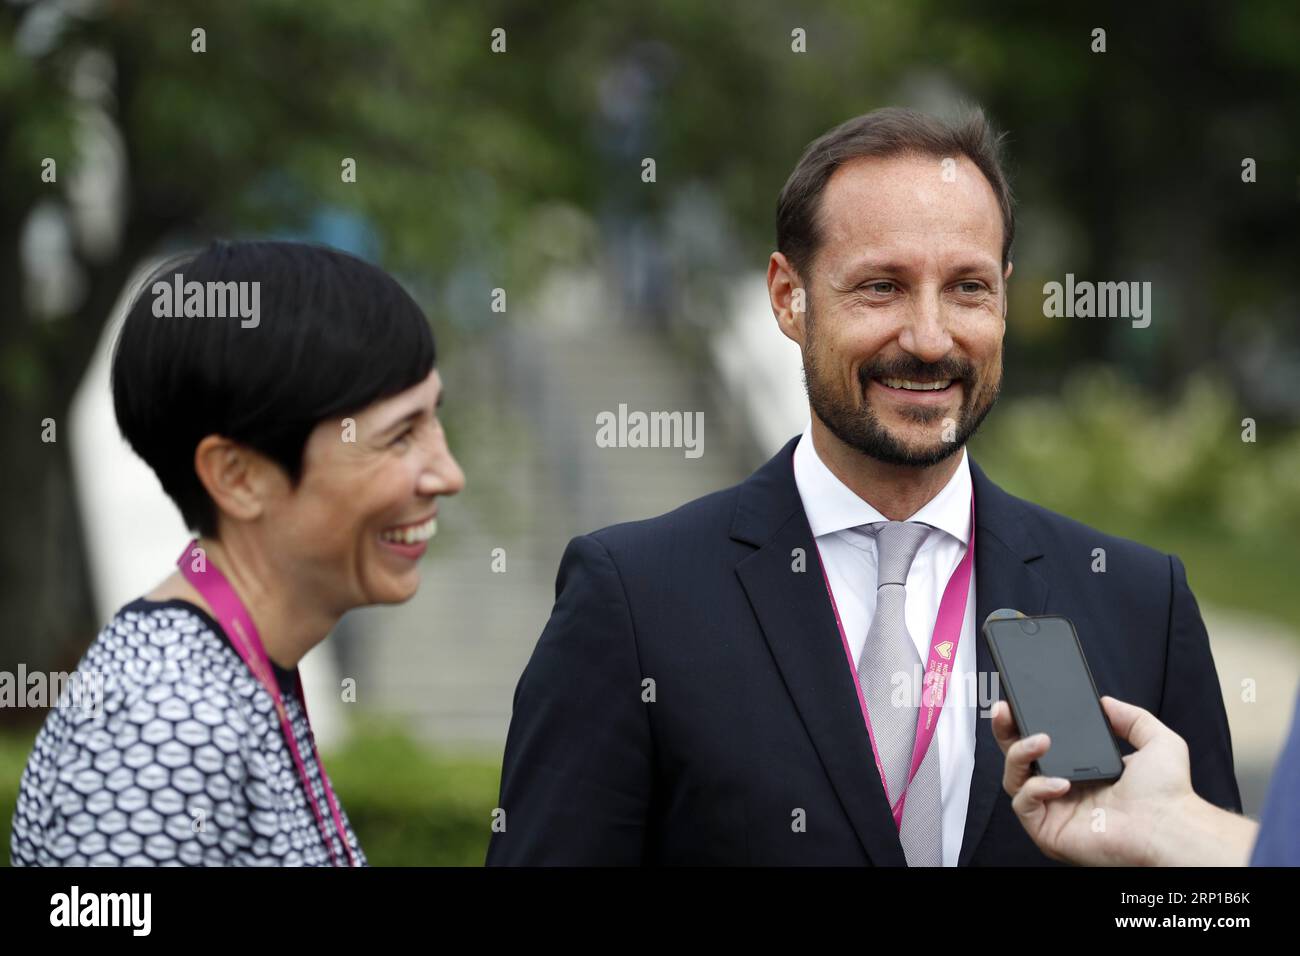 (180622) -- UNITED NATIONS, June 22, 2018 -- Norway s Crown Prince Haakon (R) and Foreign Minister Ine Eriksen Soreide speak to journalists during a press event about the launch of Norway s campaign for an elected seat in the UN Security Council for the 2021-2022 term at the United Nations headquarters in New York, on June 22, 2018. ) UN-SECURITY COUNCIL-NORWAY-SEAT-CAMPAIGN LixMuzi PUBLICATIONxNOTxINxCHN Stock Photo